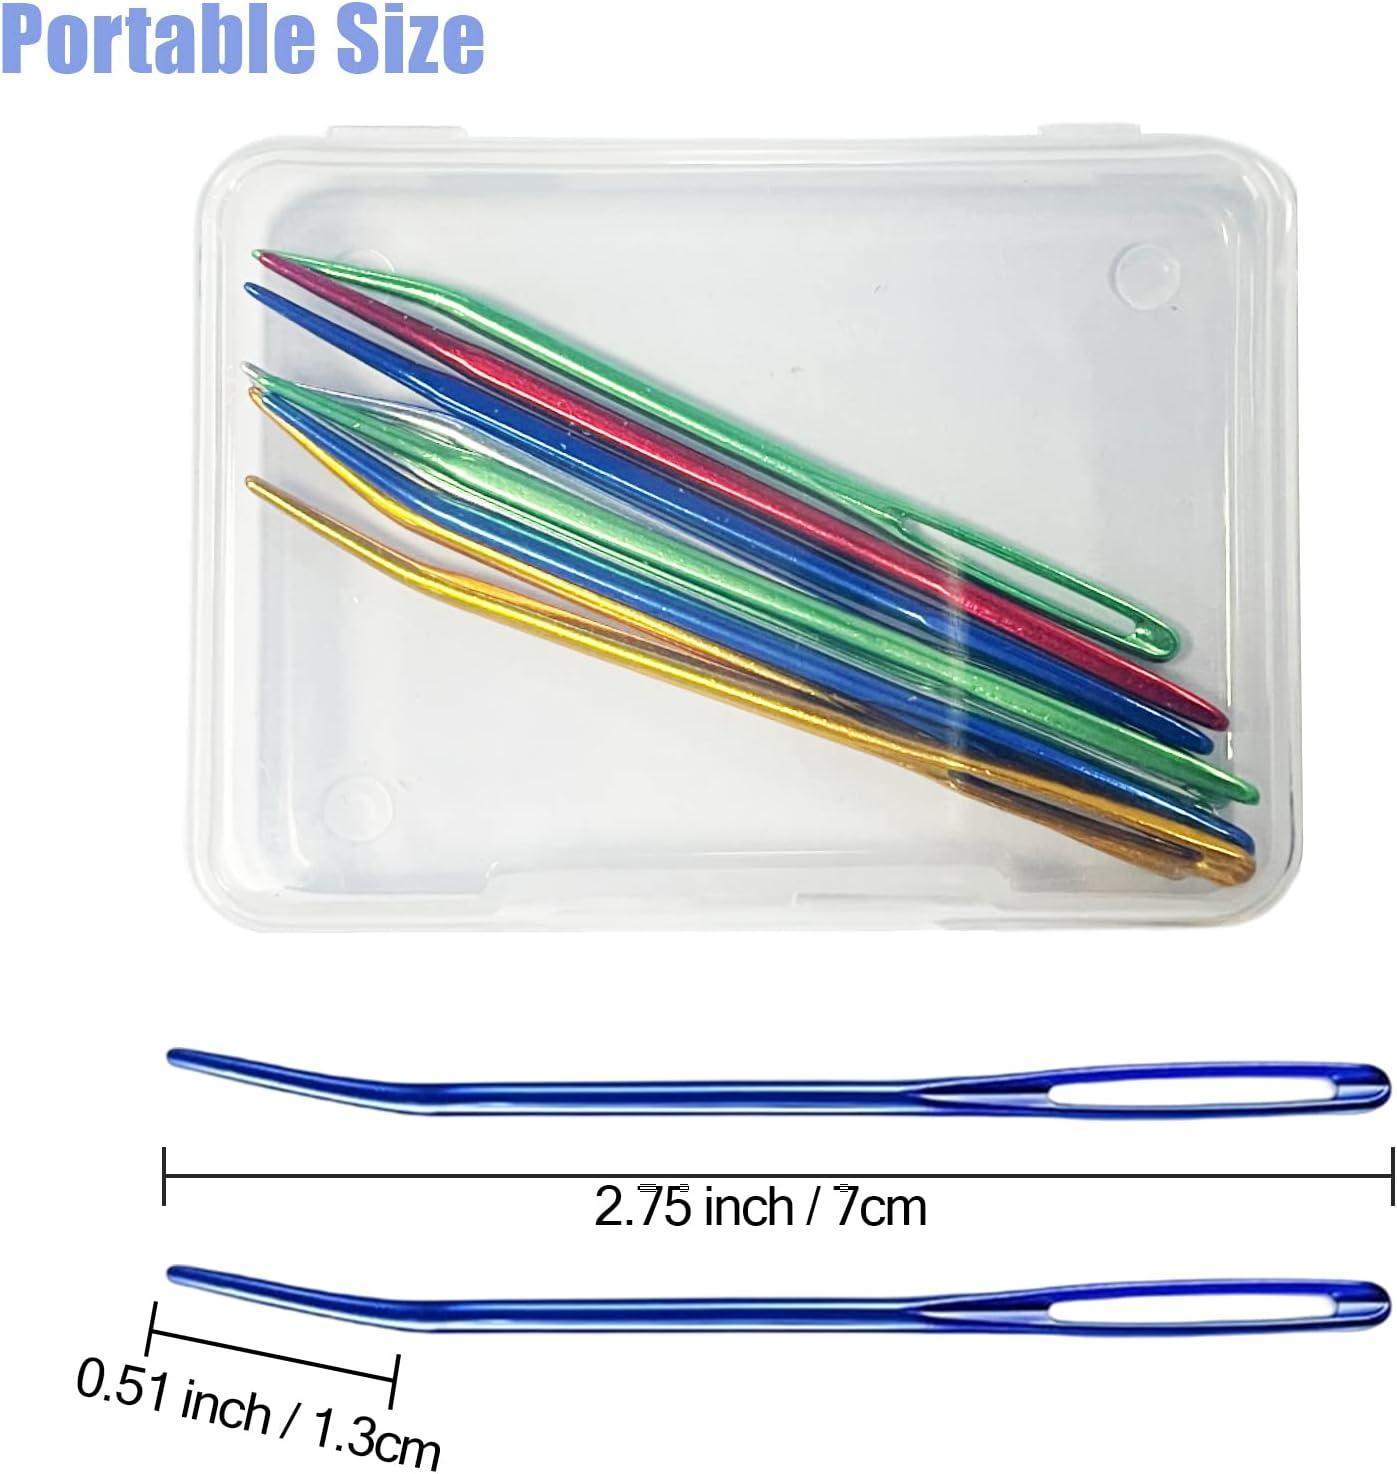 Plastic Large Eye Sewing Needles, Blunt Needles, Curved Tapestry Needles,  Craft Weaving Needles, With Storage Box And Knitting Crochet Stitch  Needlework Sewing Tools